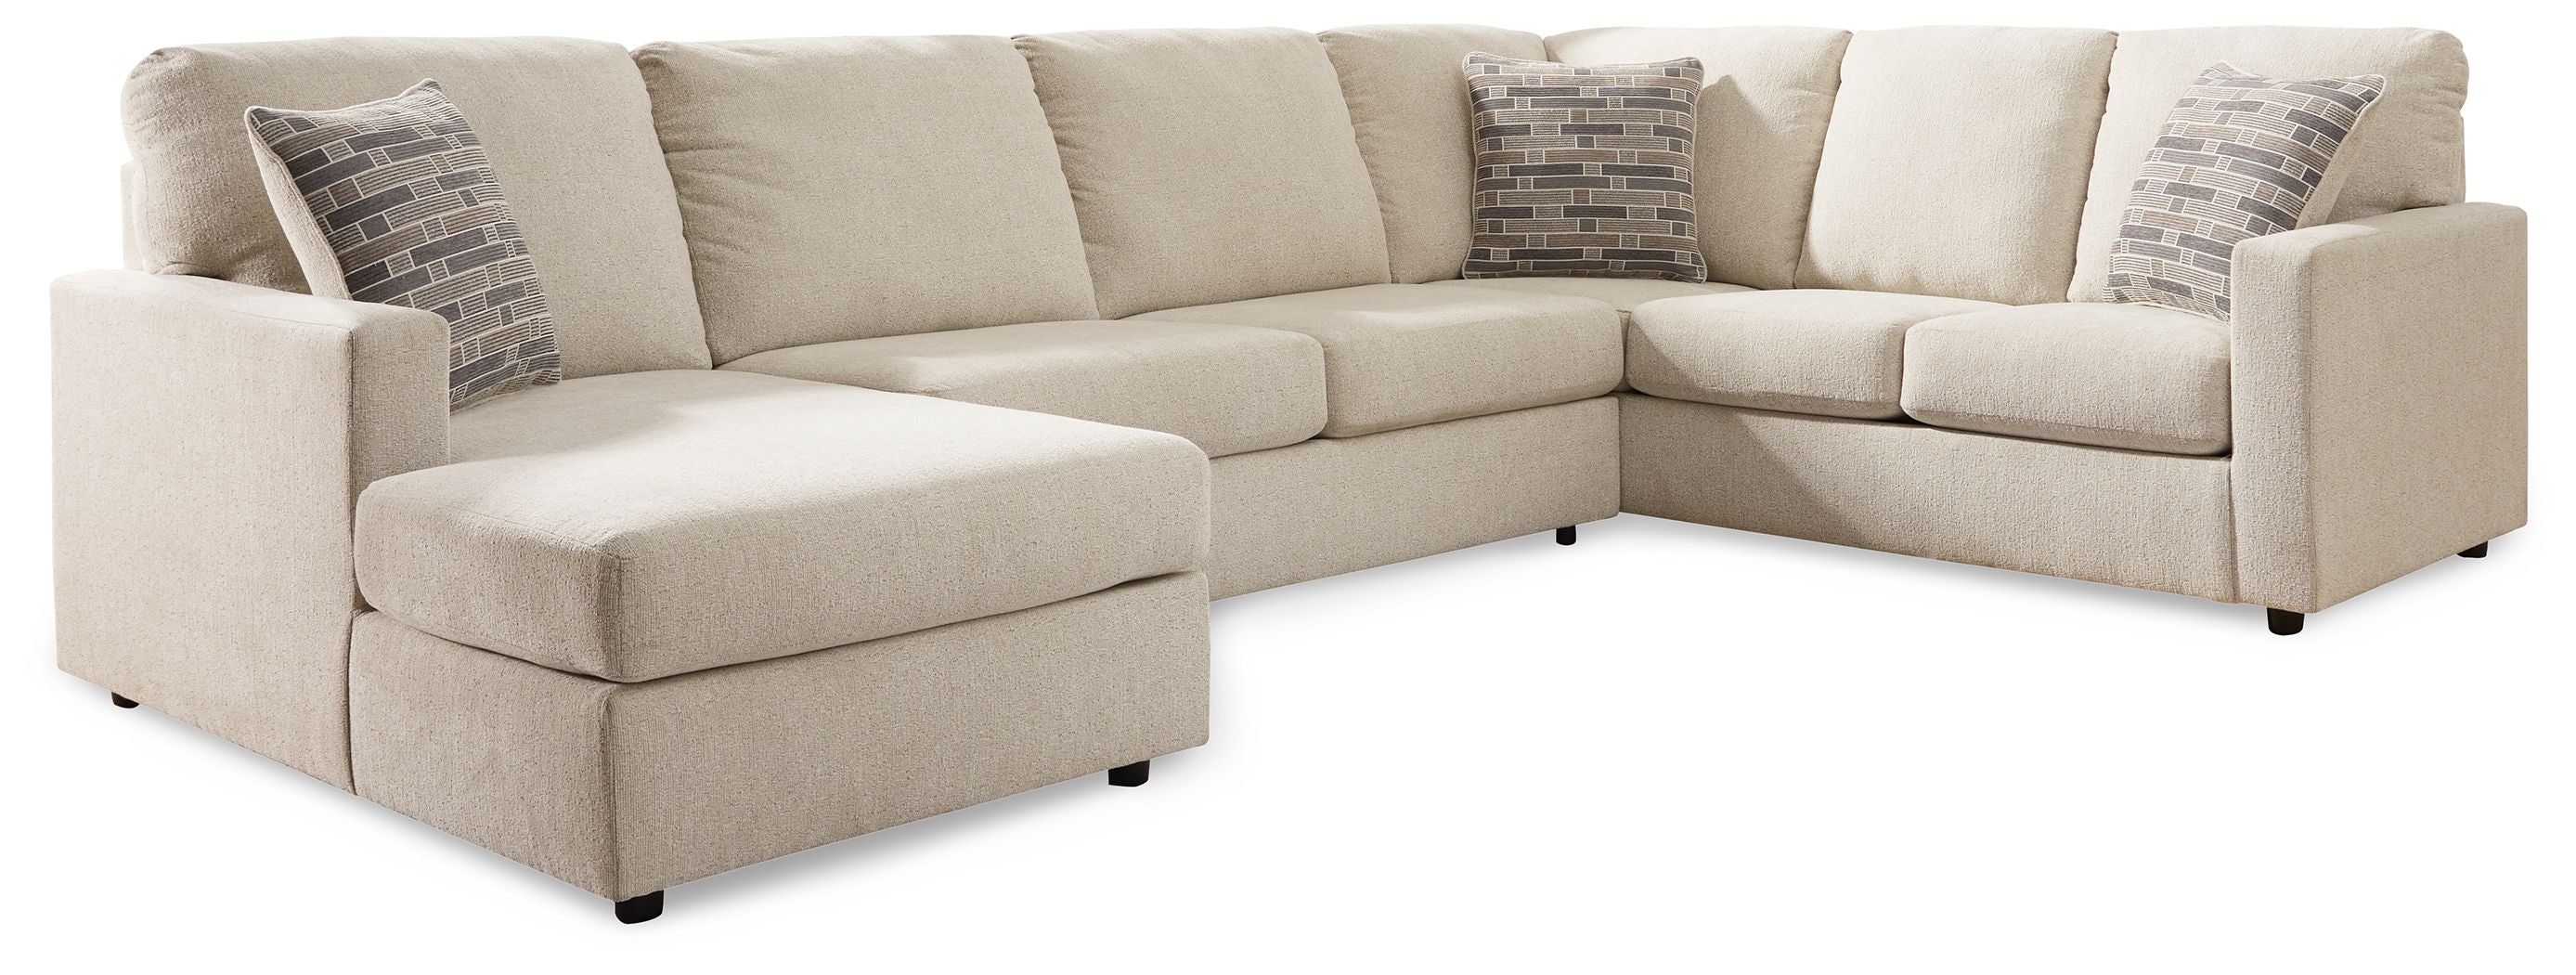 Edenfield 3 Piece Linen-Look U Shaped Sectional-Stationary Sectionals-American Furniture Outlet